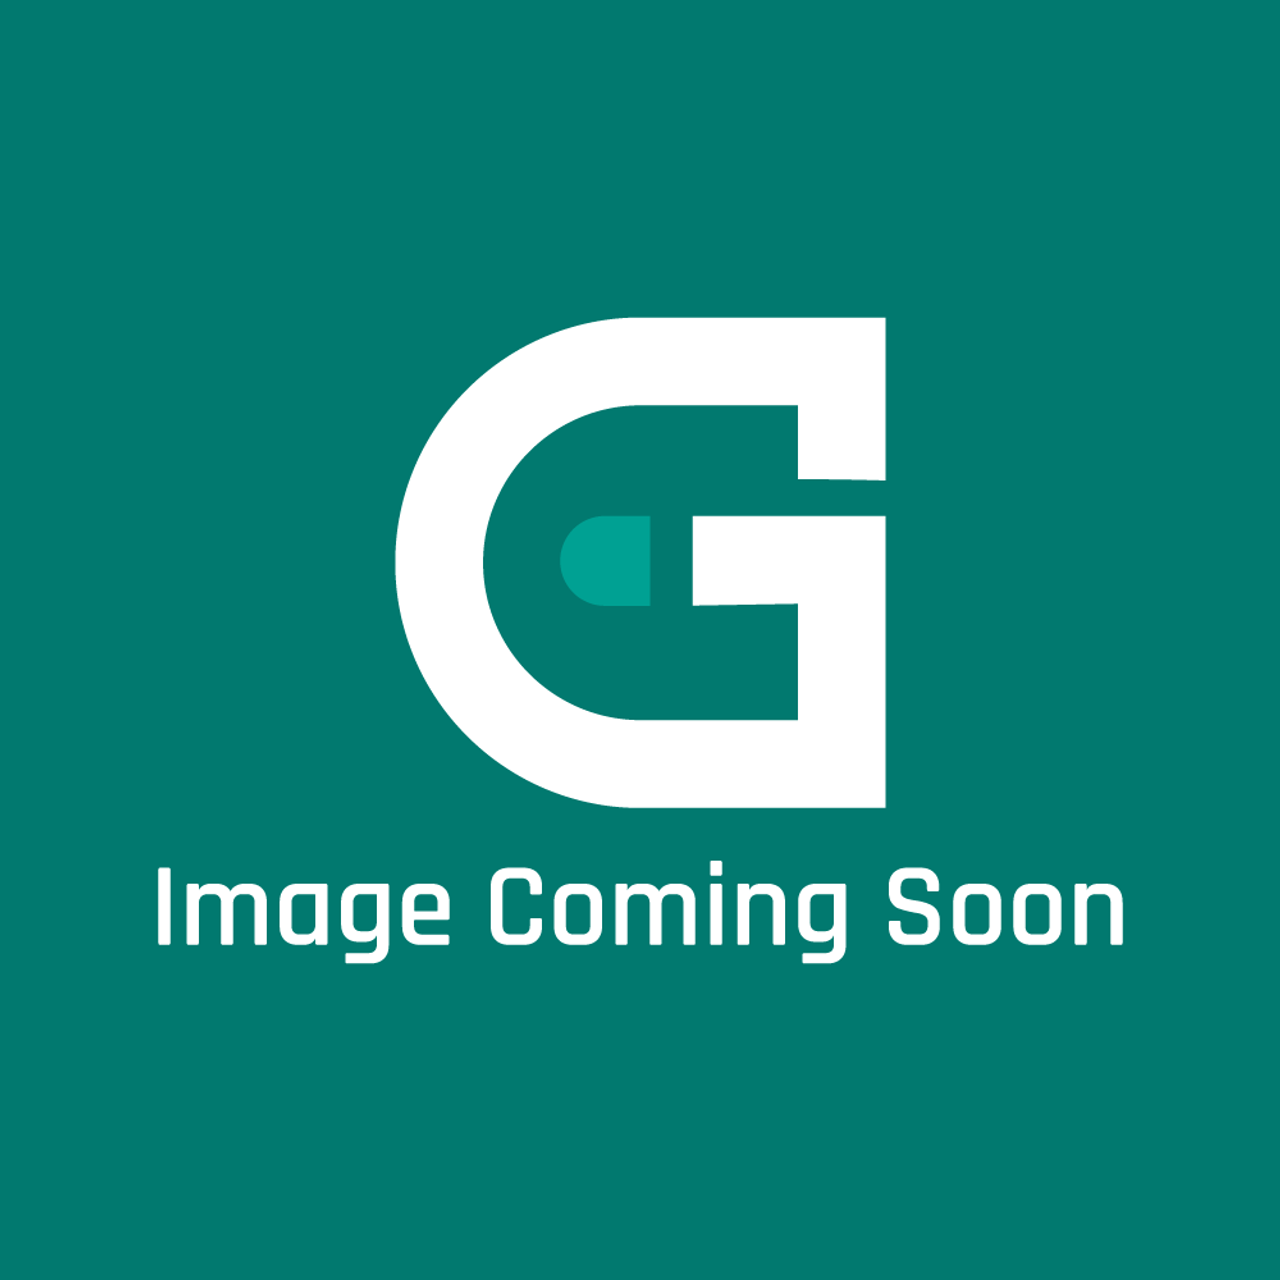 AGA Marvel 037373 0658 - Grill Door Outer Panel - Cranberry - Image Coming Soon!